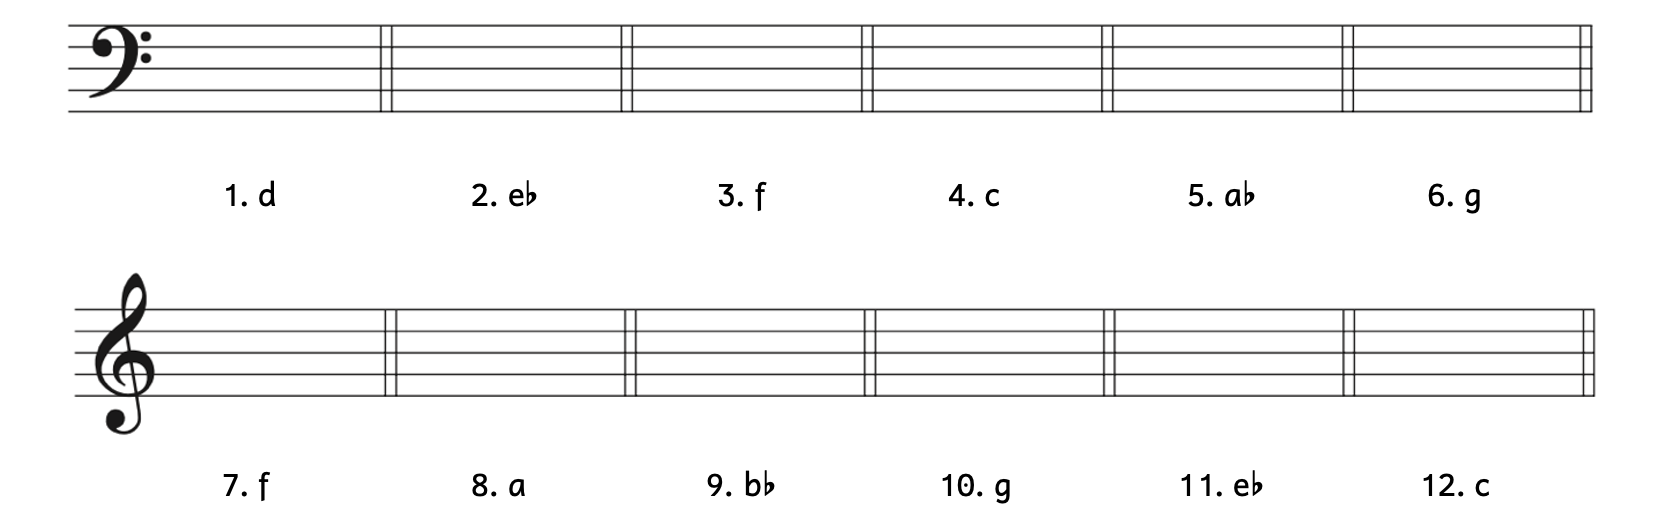 Number 1 through 6 are in bass clef. Number 1, D minor. Number 2, E-flat minor. Number 3, F minor. Number 4, C minor. Number 5, A-flat minor. Number 6, G minor. Numbers 7 through 12 are in treble clef. Number 7, F minor. Number 8, A minor. Number 9, B-flat minor. Number 10, G minor. Number 11, E-flat minor. Number 12, C minor.